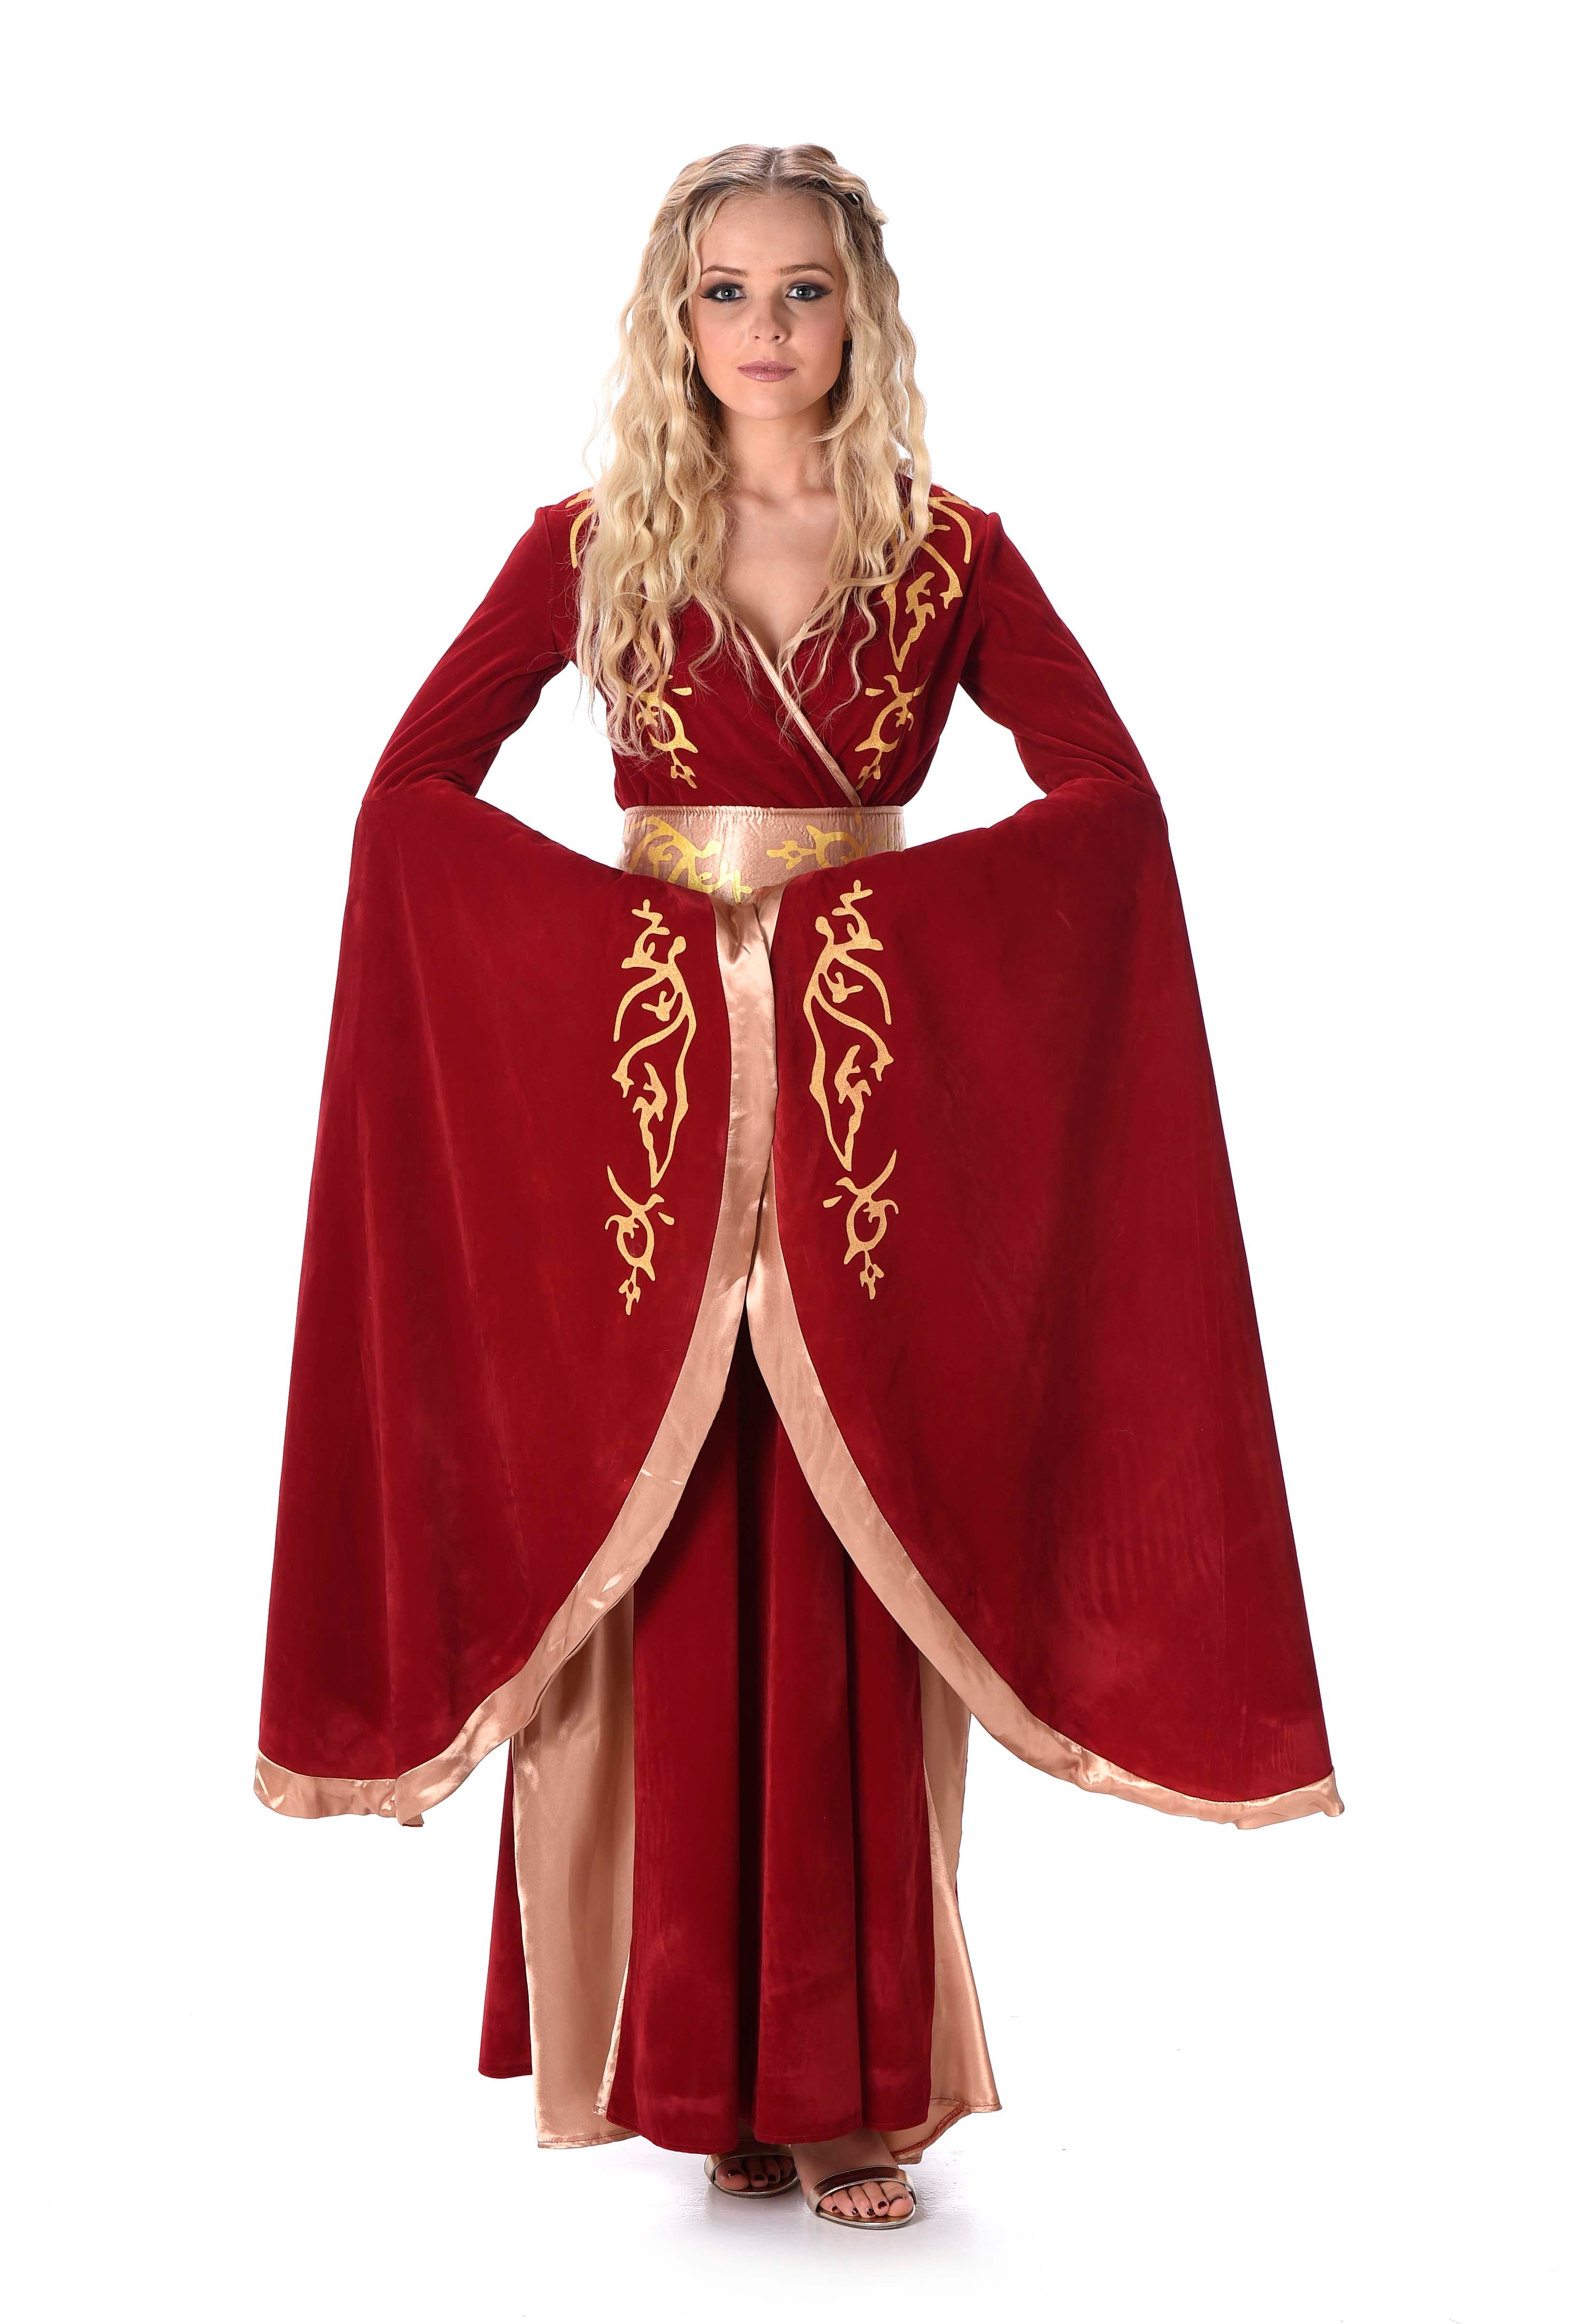 Medieval Fairytale Fantasy Queen Adult Costume